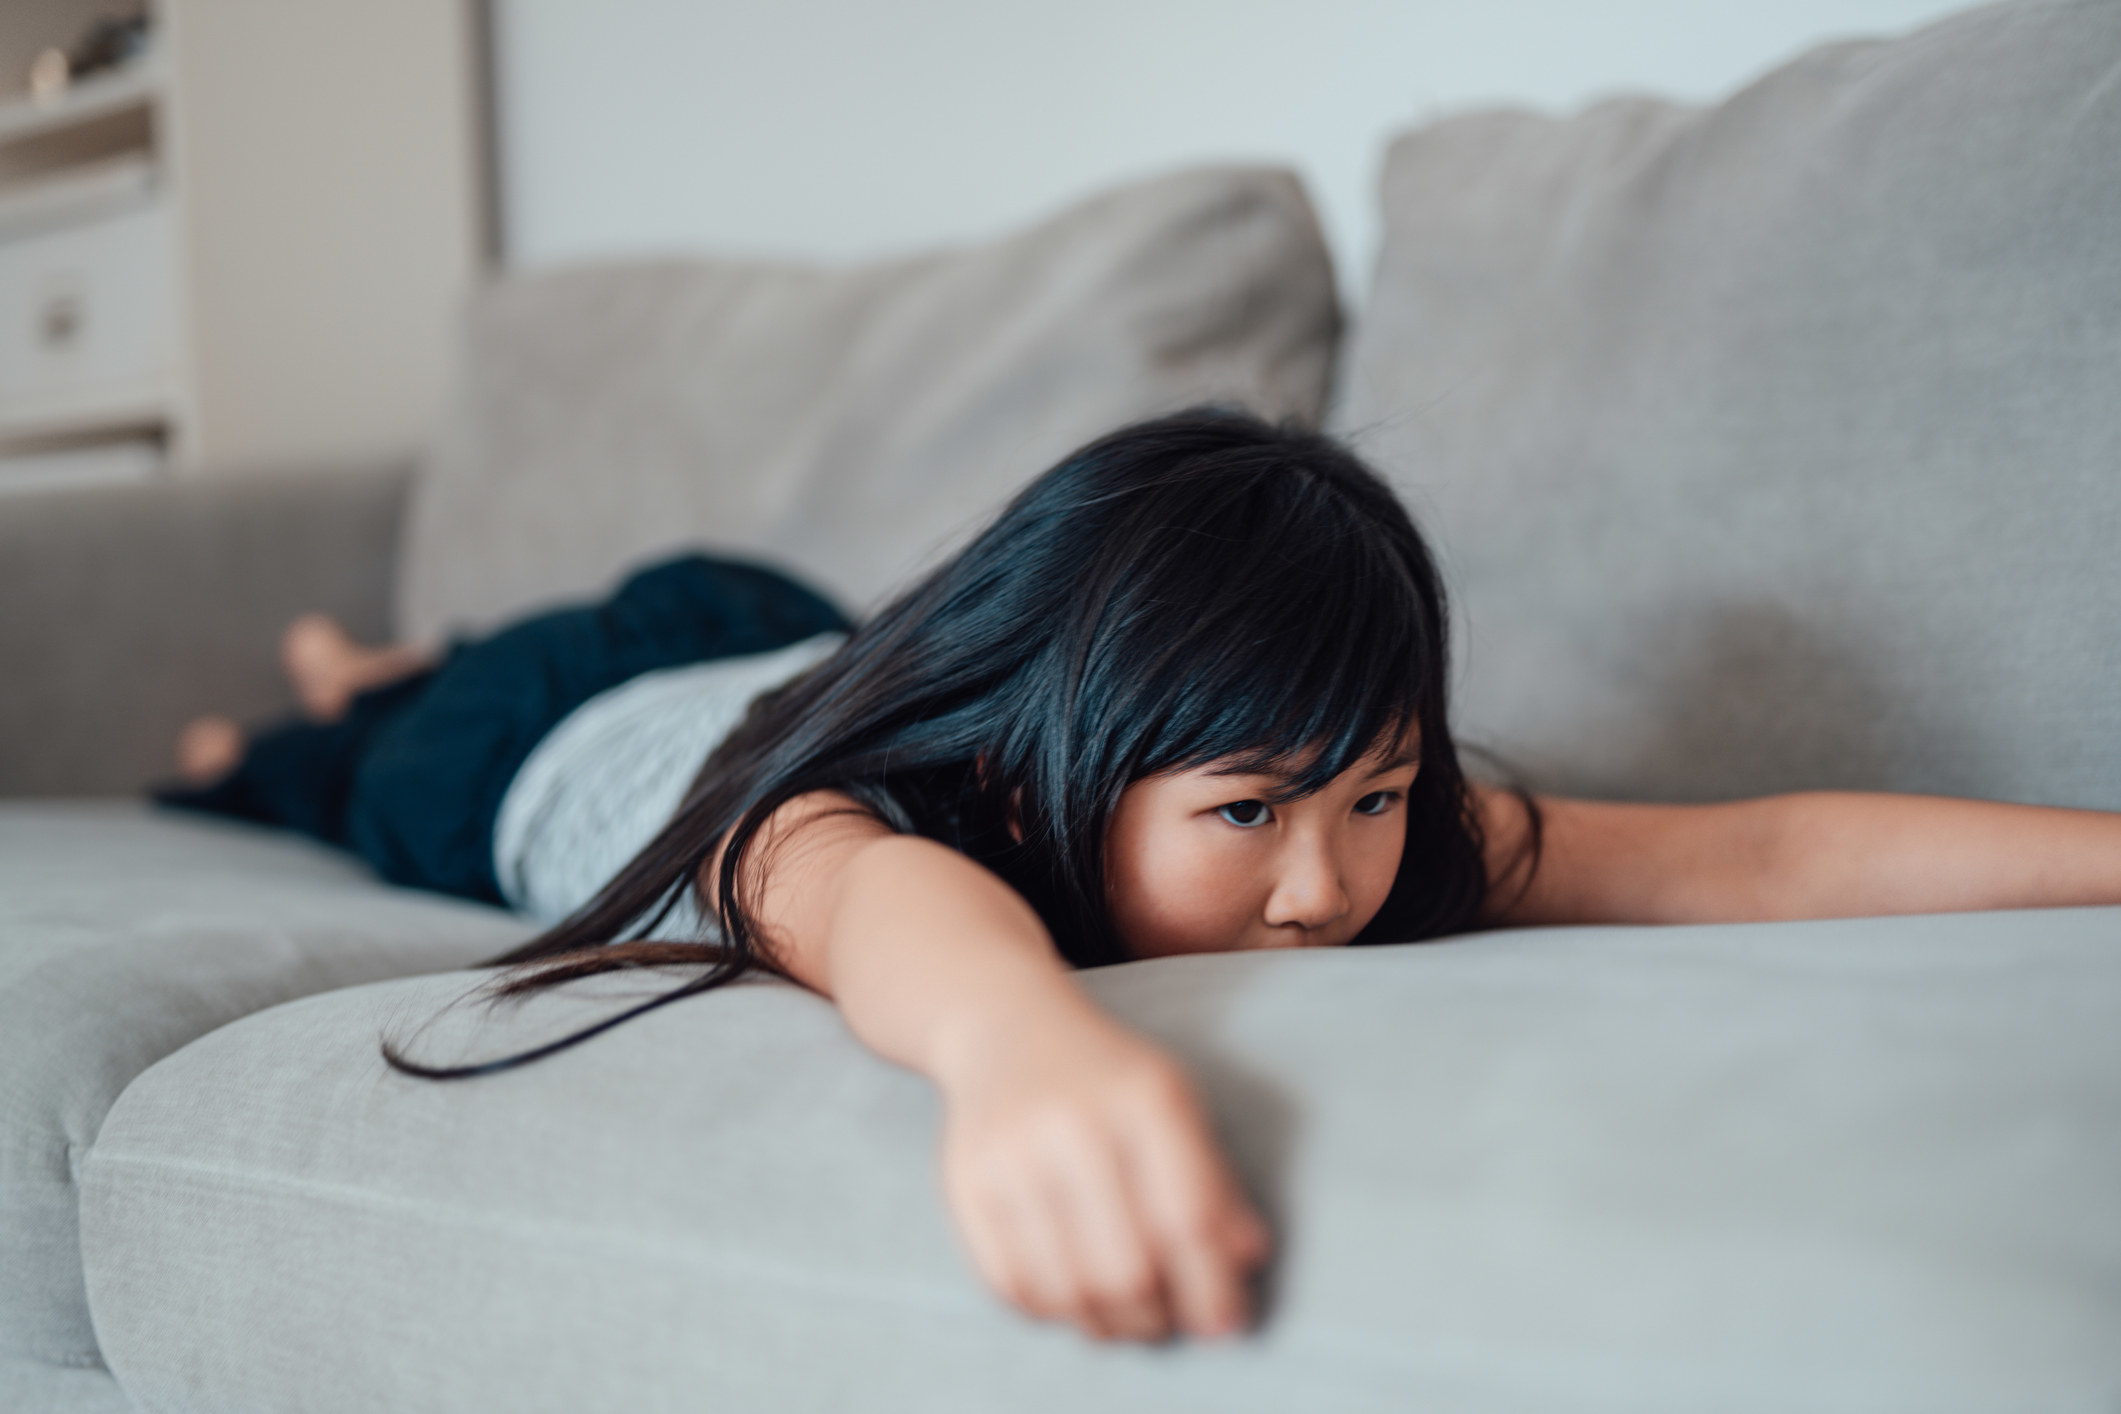 A girl lays on the couch looking upset.